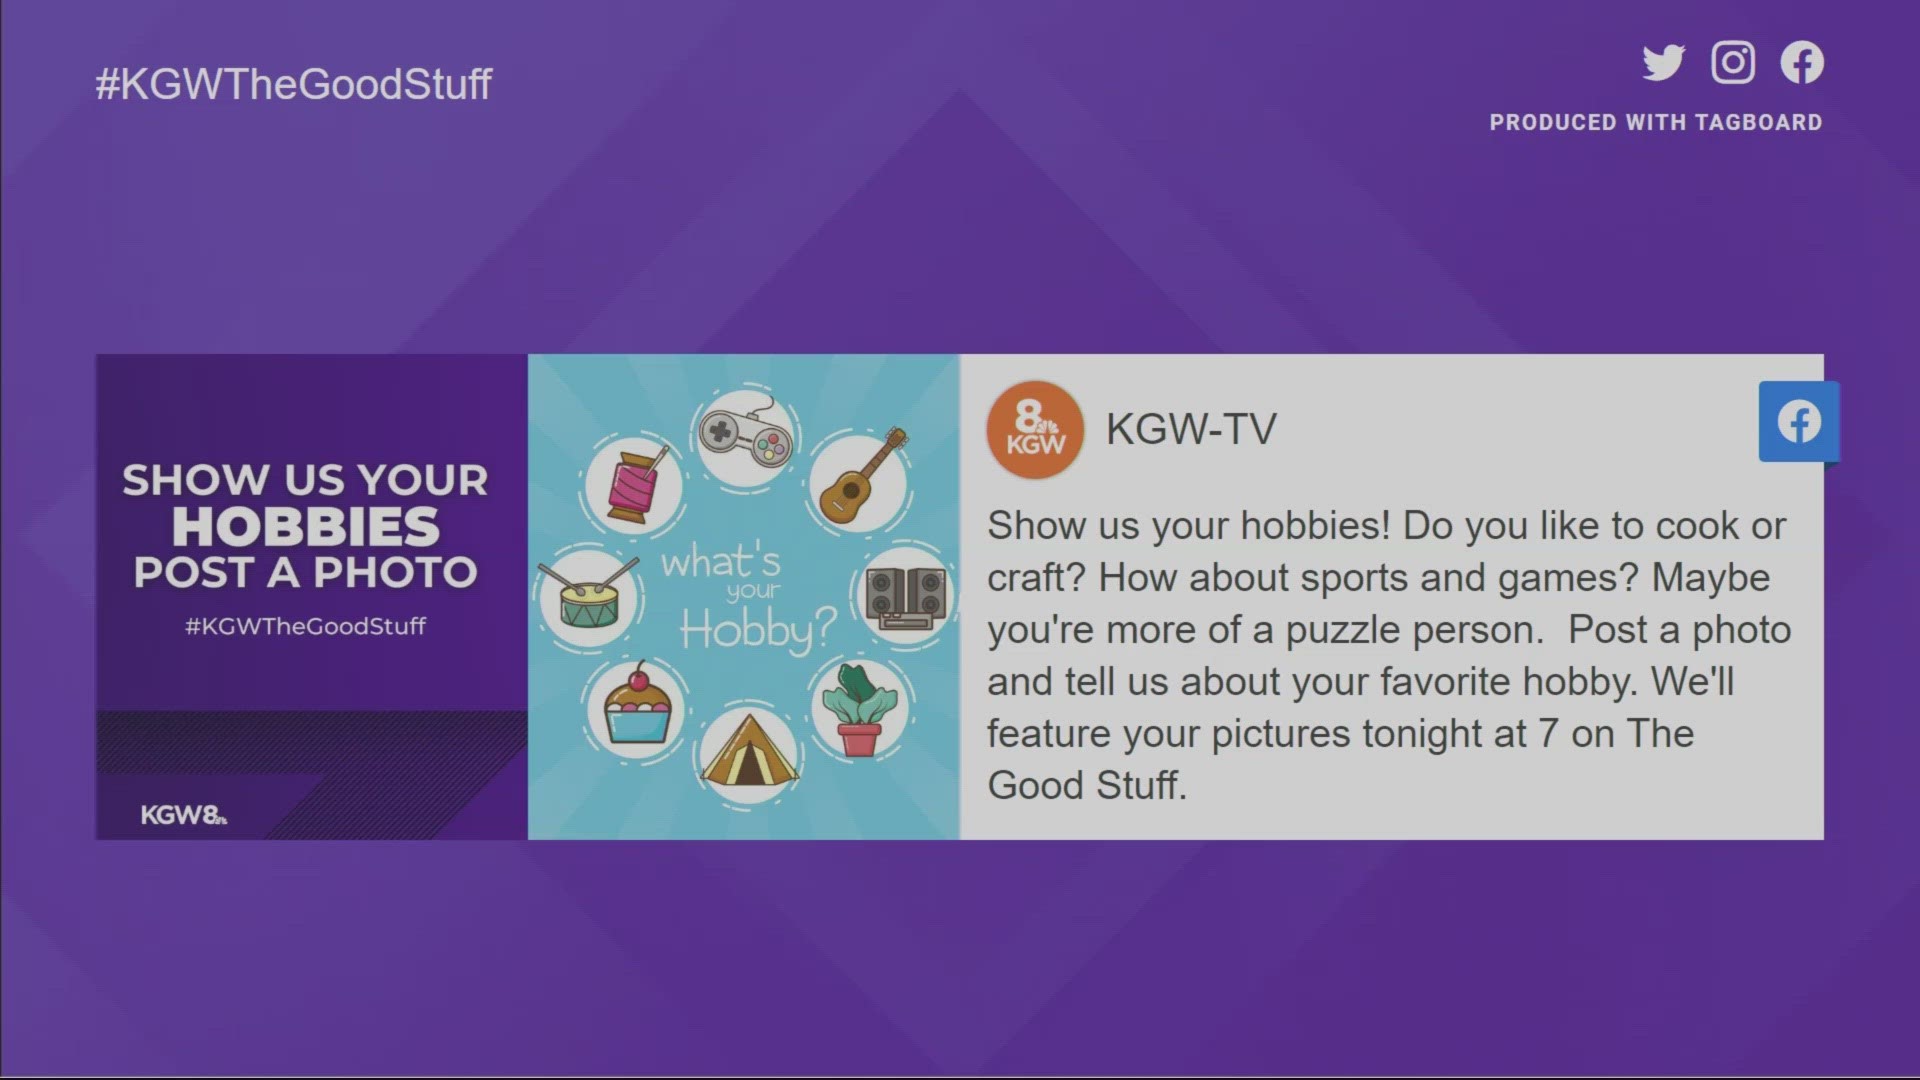 On the Good Stuff, KGW viewers show us their hobbies.